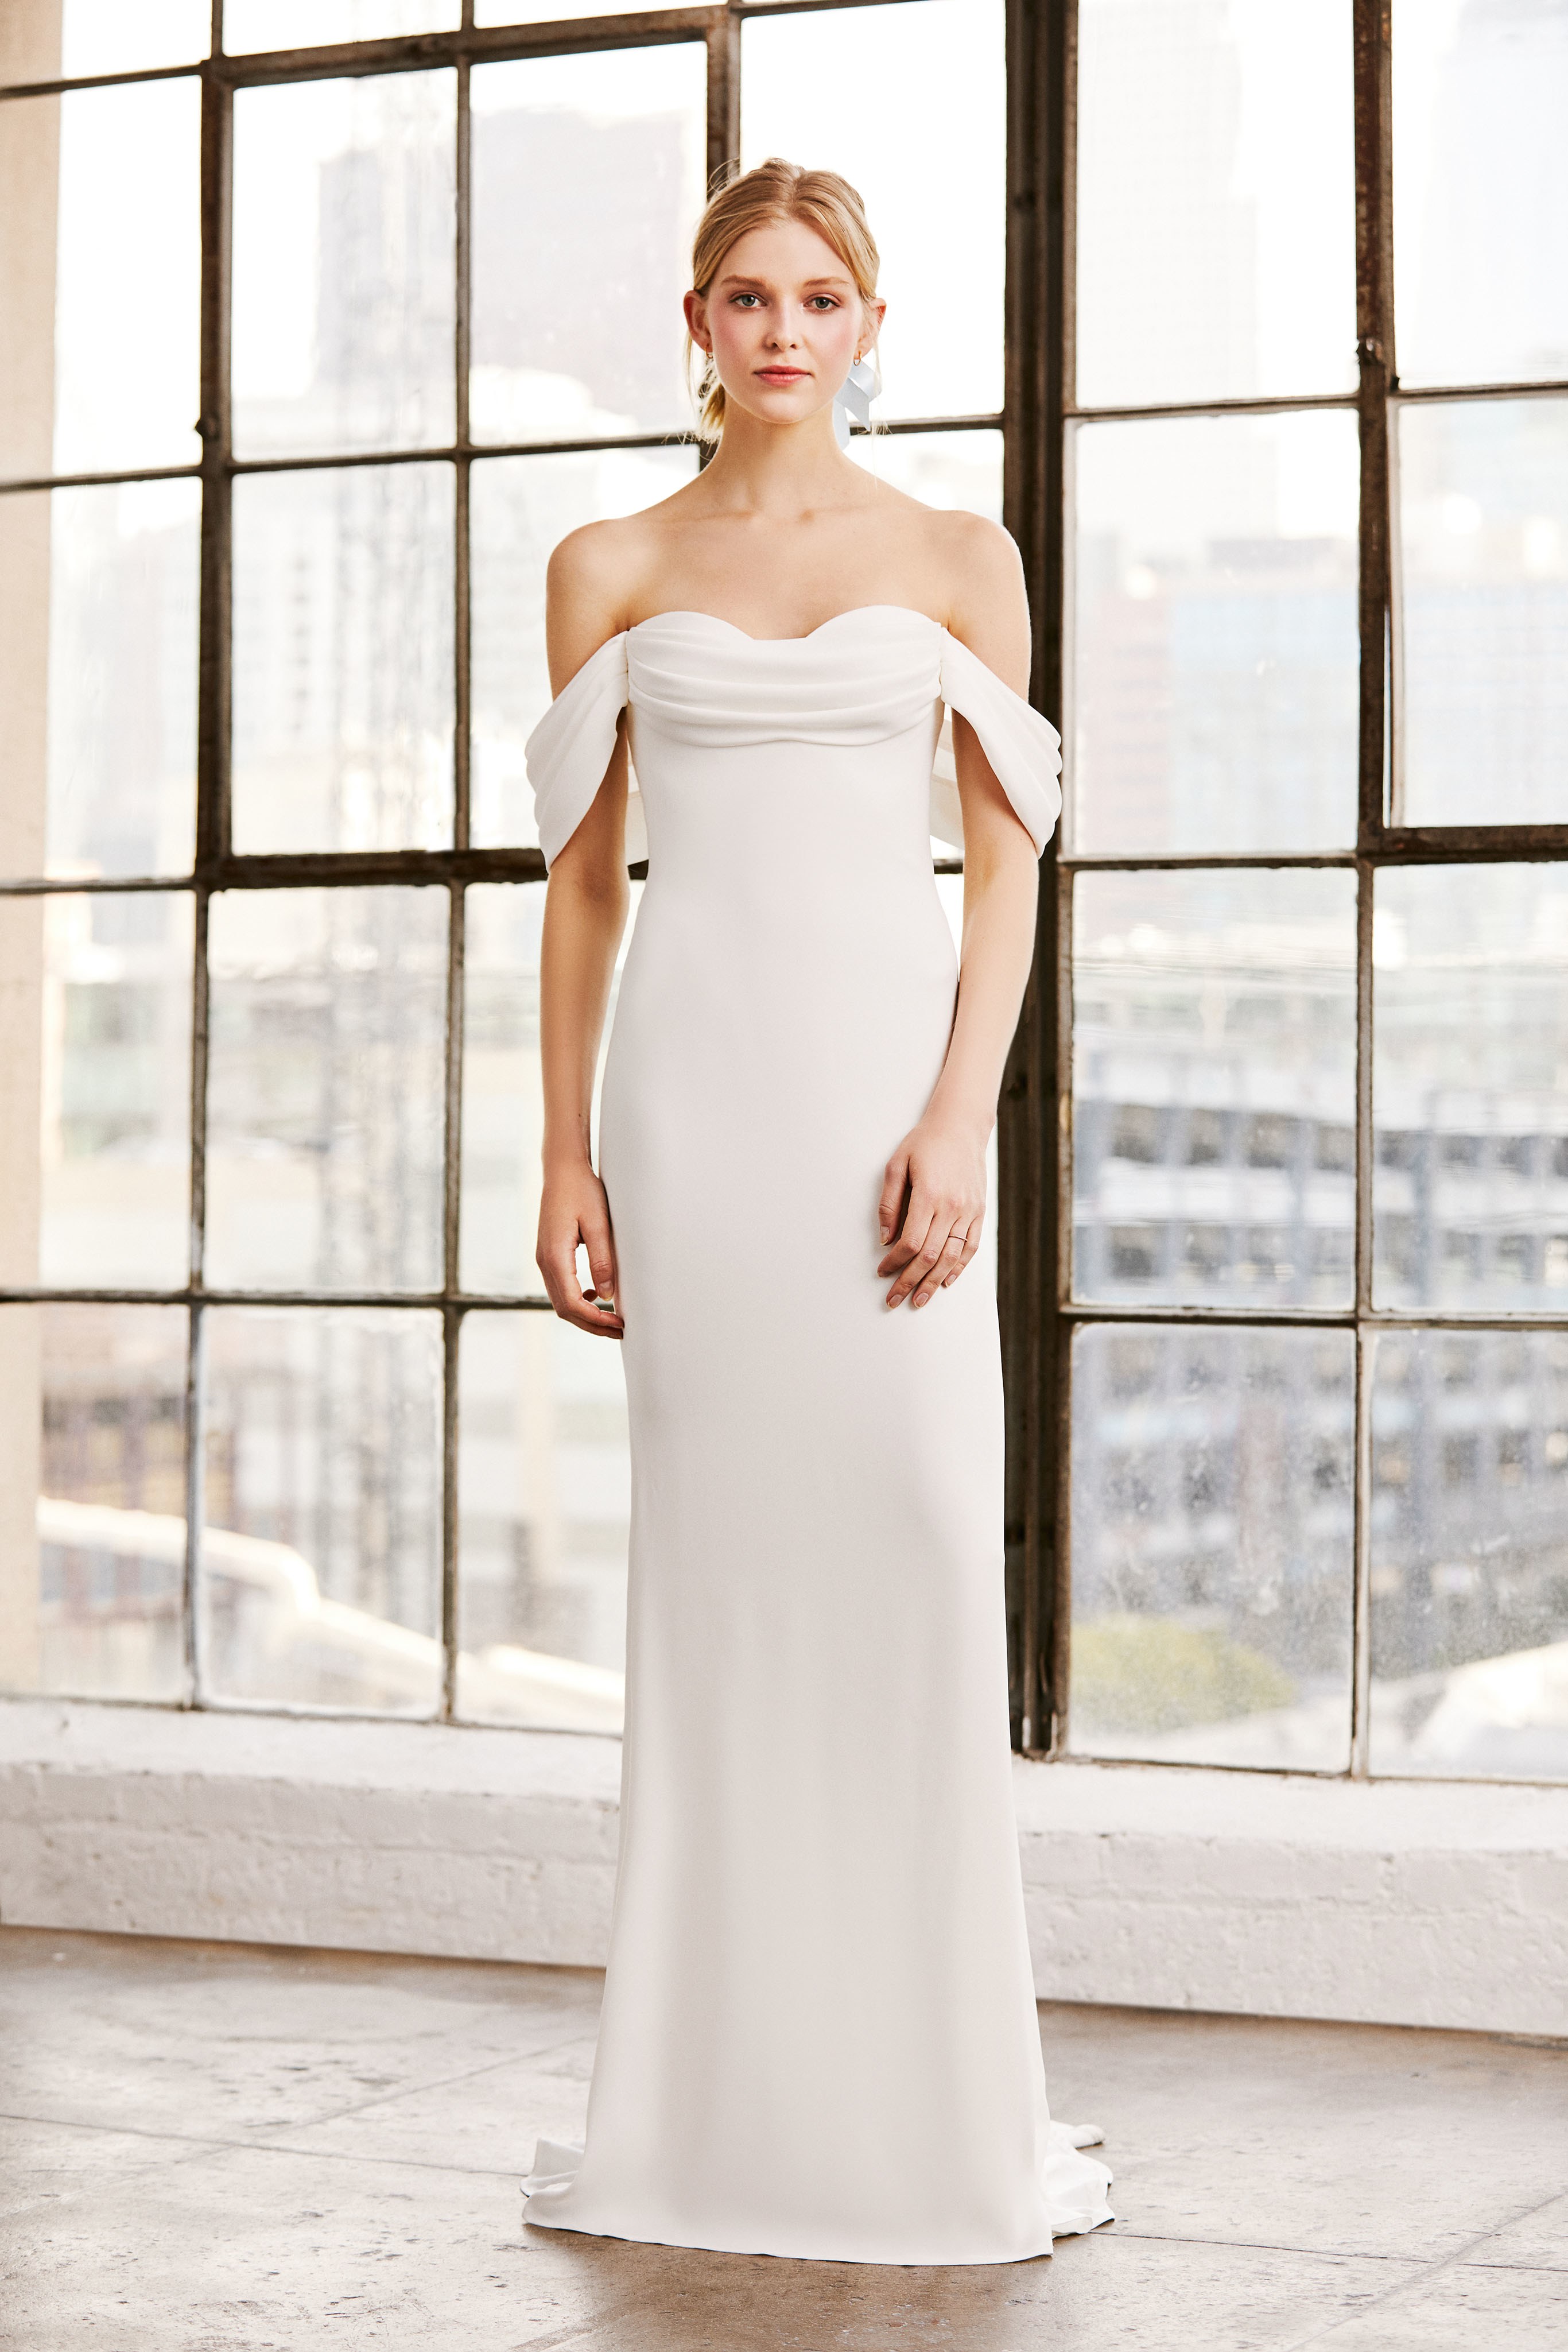 pure-elegance-tadashi-shojis-spring-2019-wedding-collection-is-a-must-see